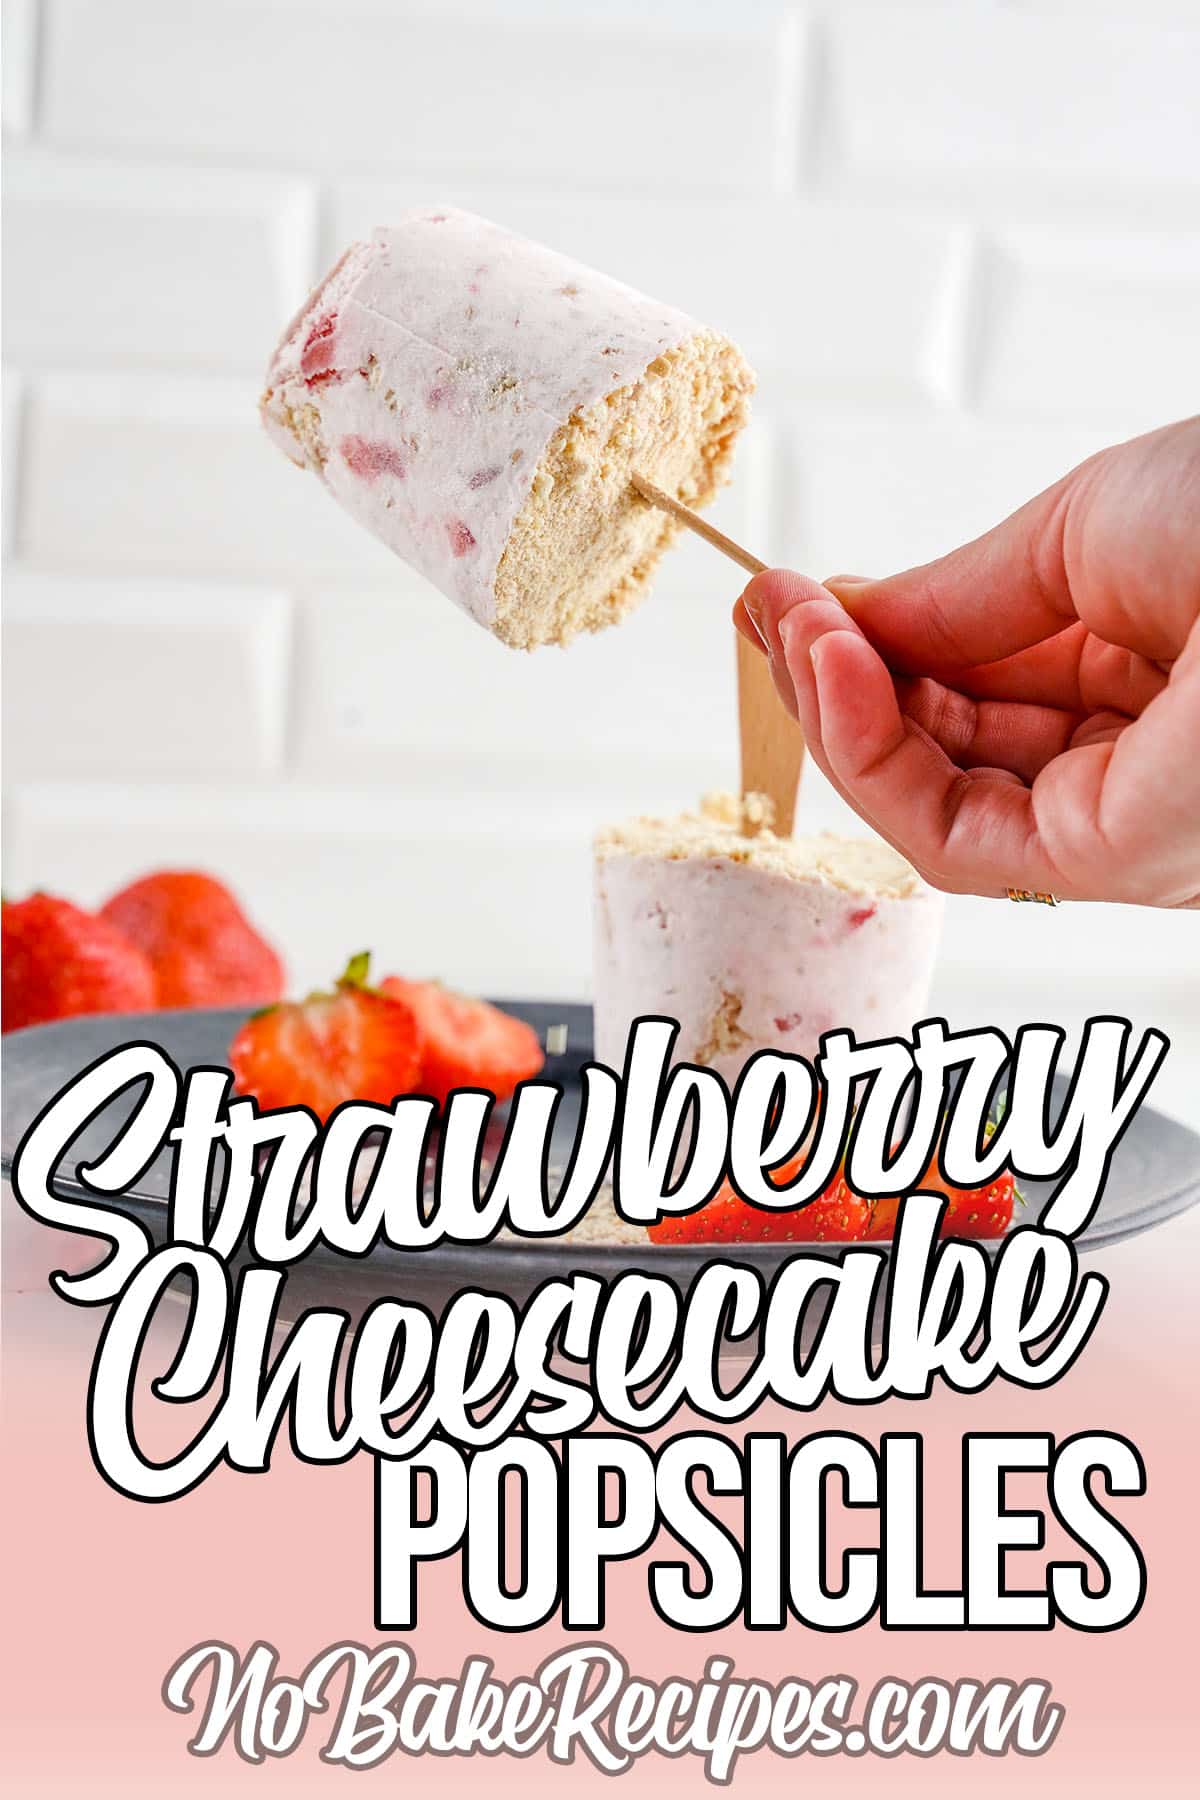 hand holding up a strawberry popsicle with text which reads strawberry cheesecake popsicles